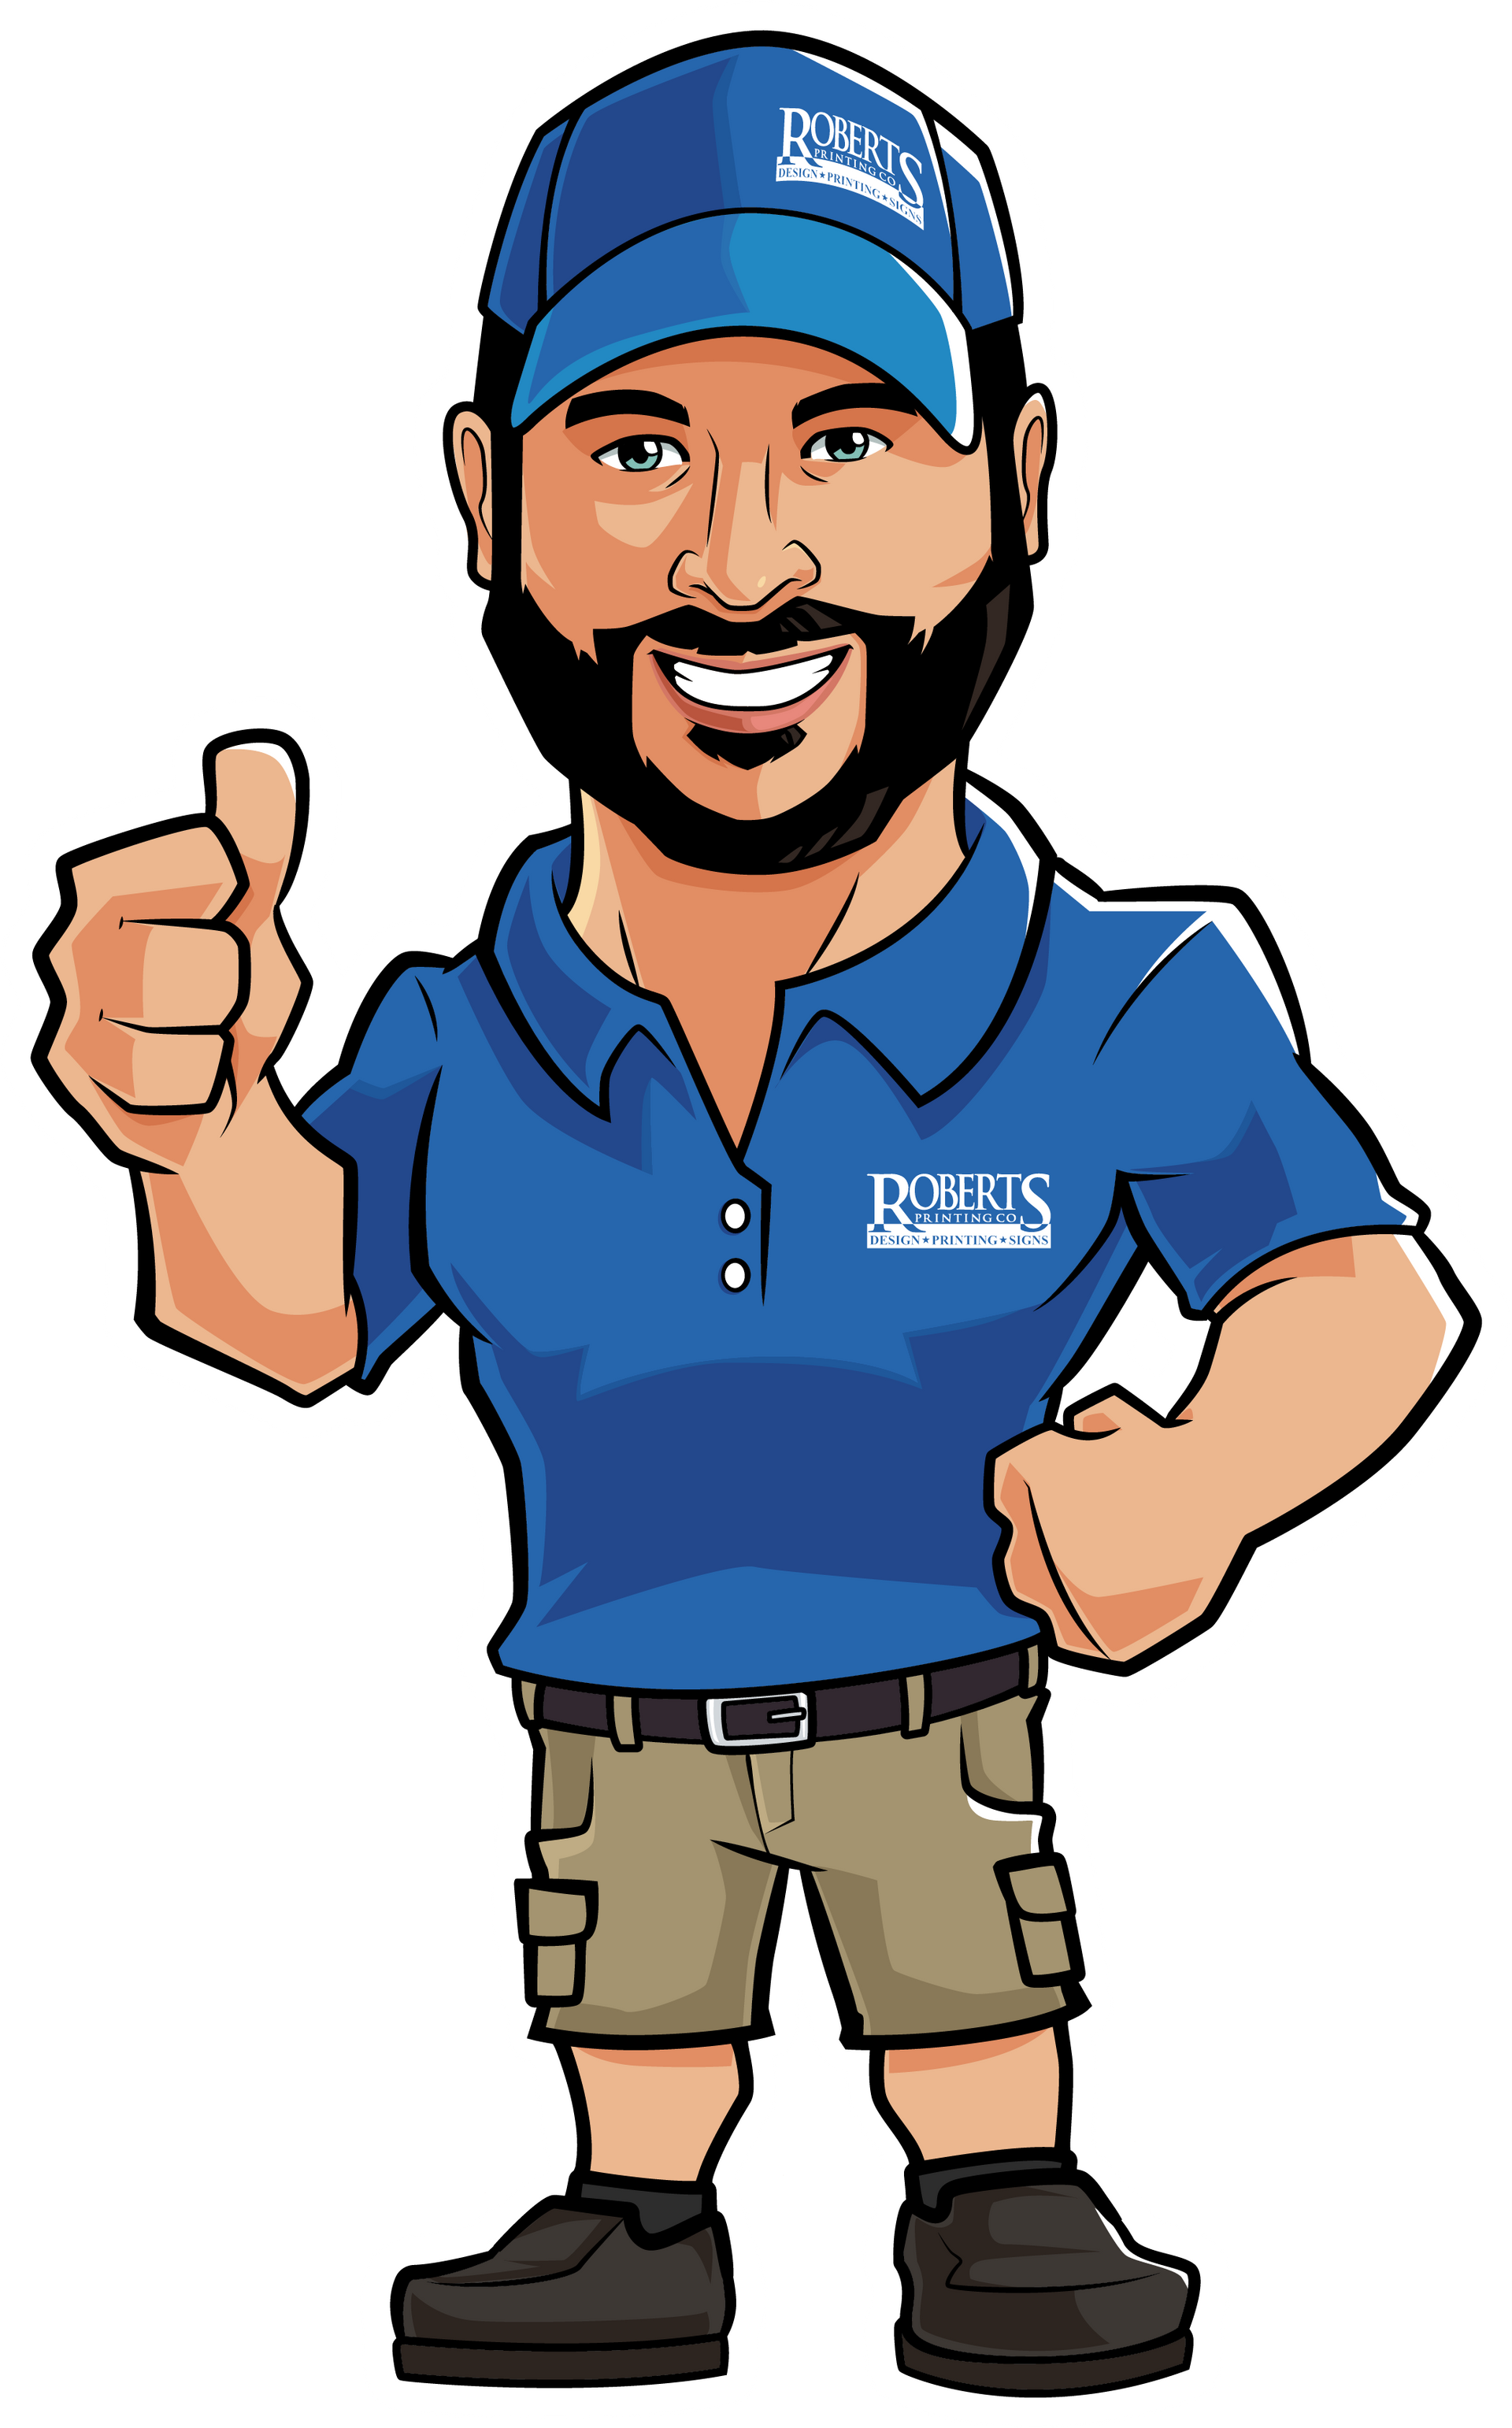 A cartoon of a man with a beard wearing a blue shirt and hat giving a thumbs up.